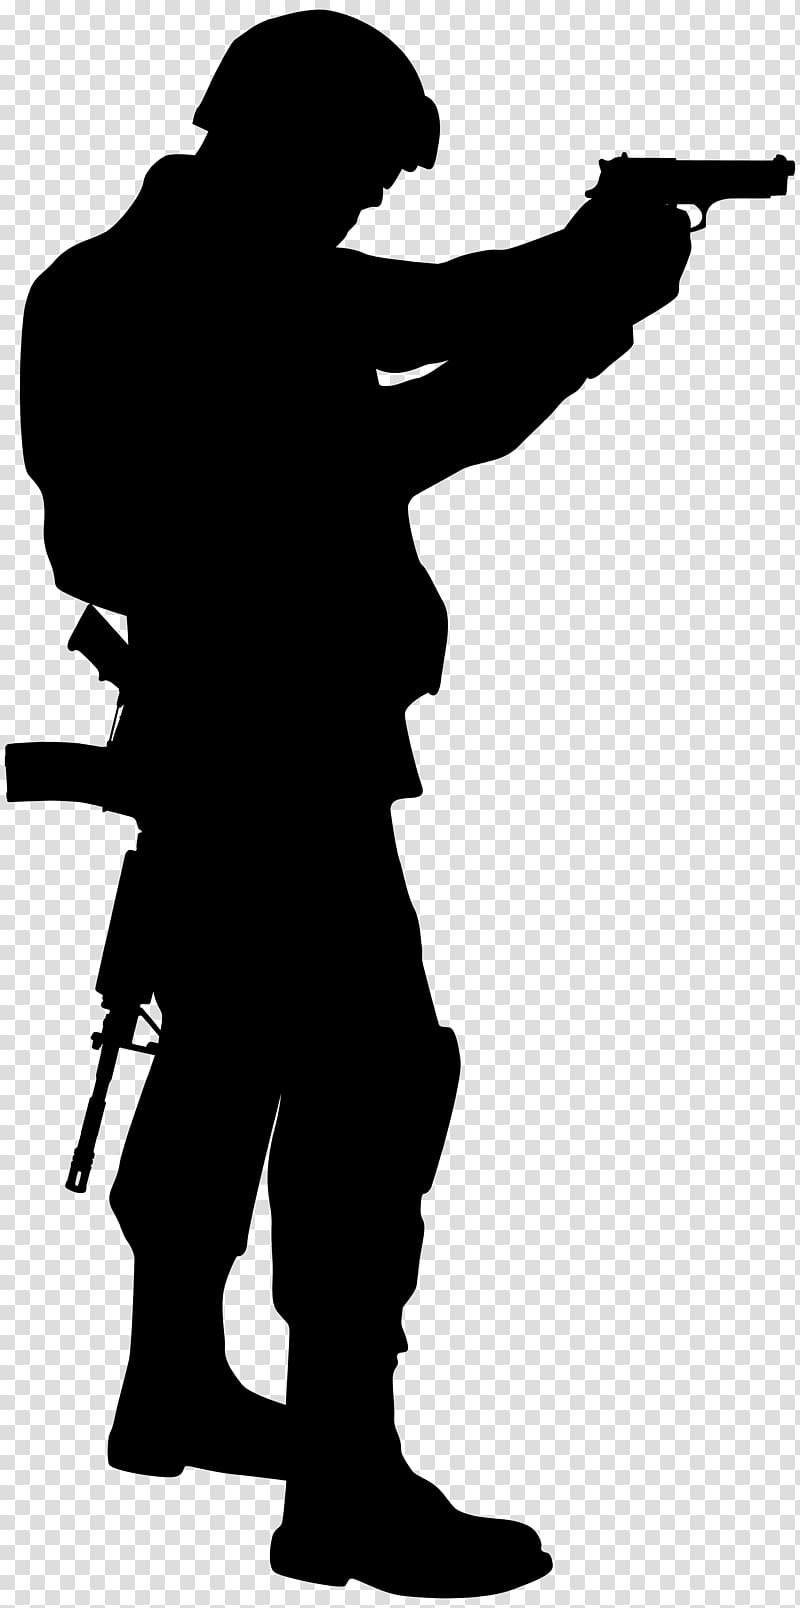 Soldier Silhouette , Soldier Silhouette transparent background PNG clipart